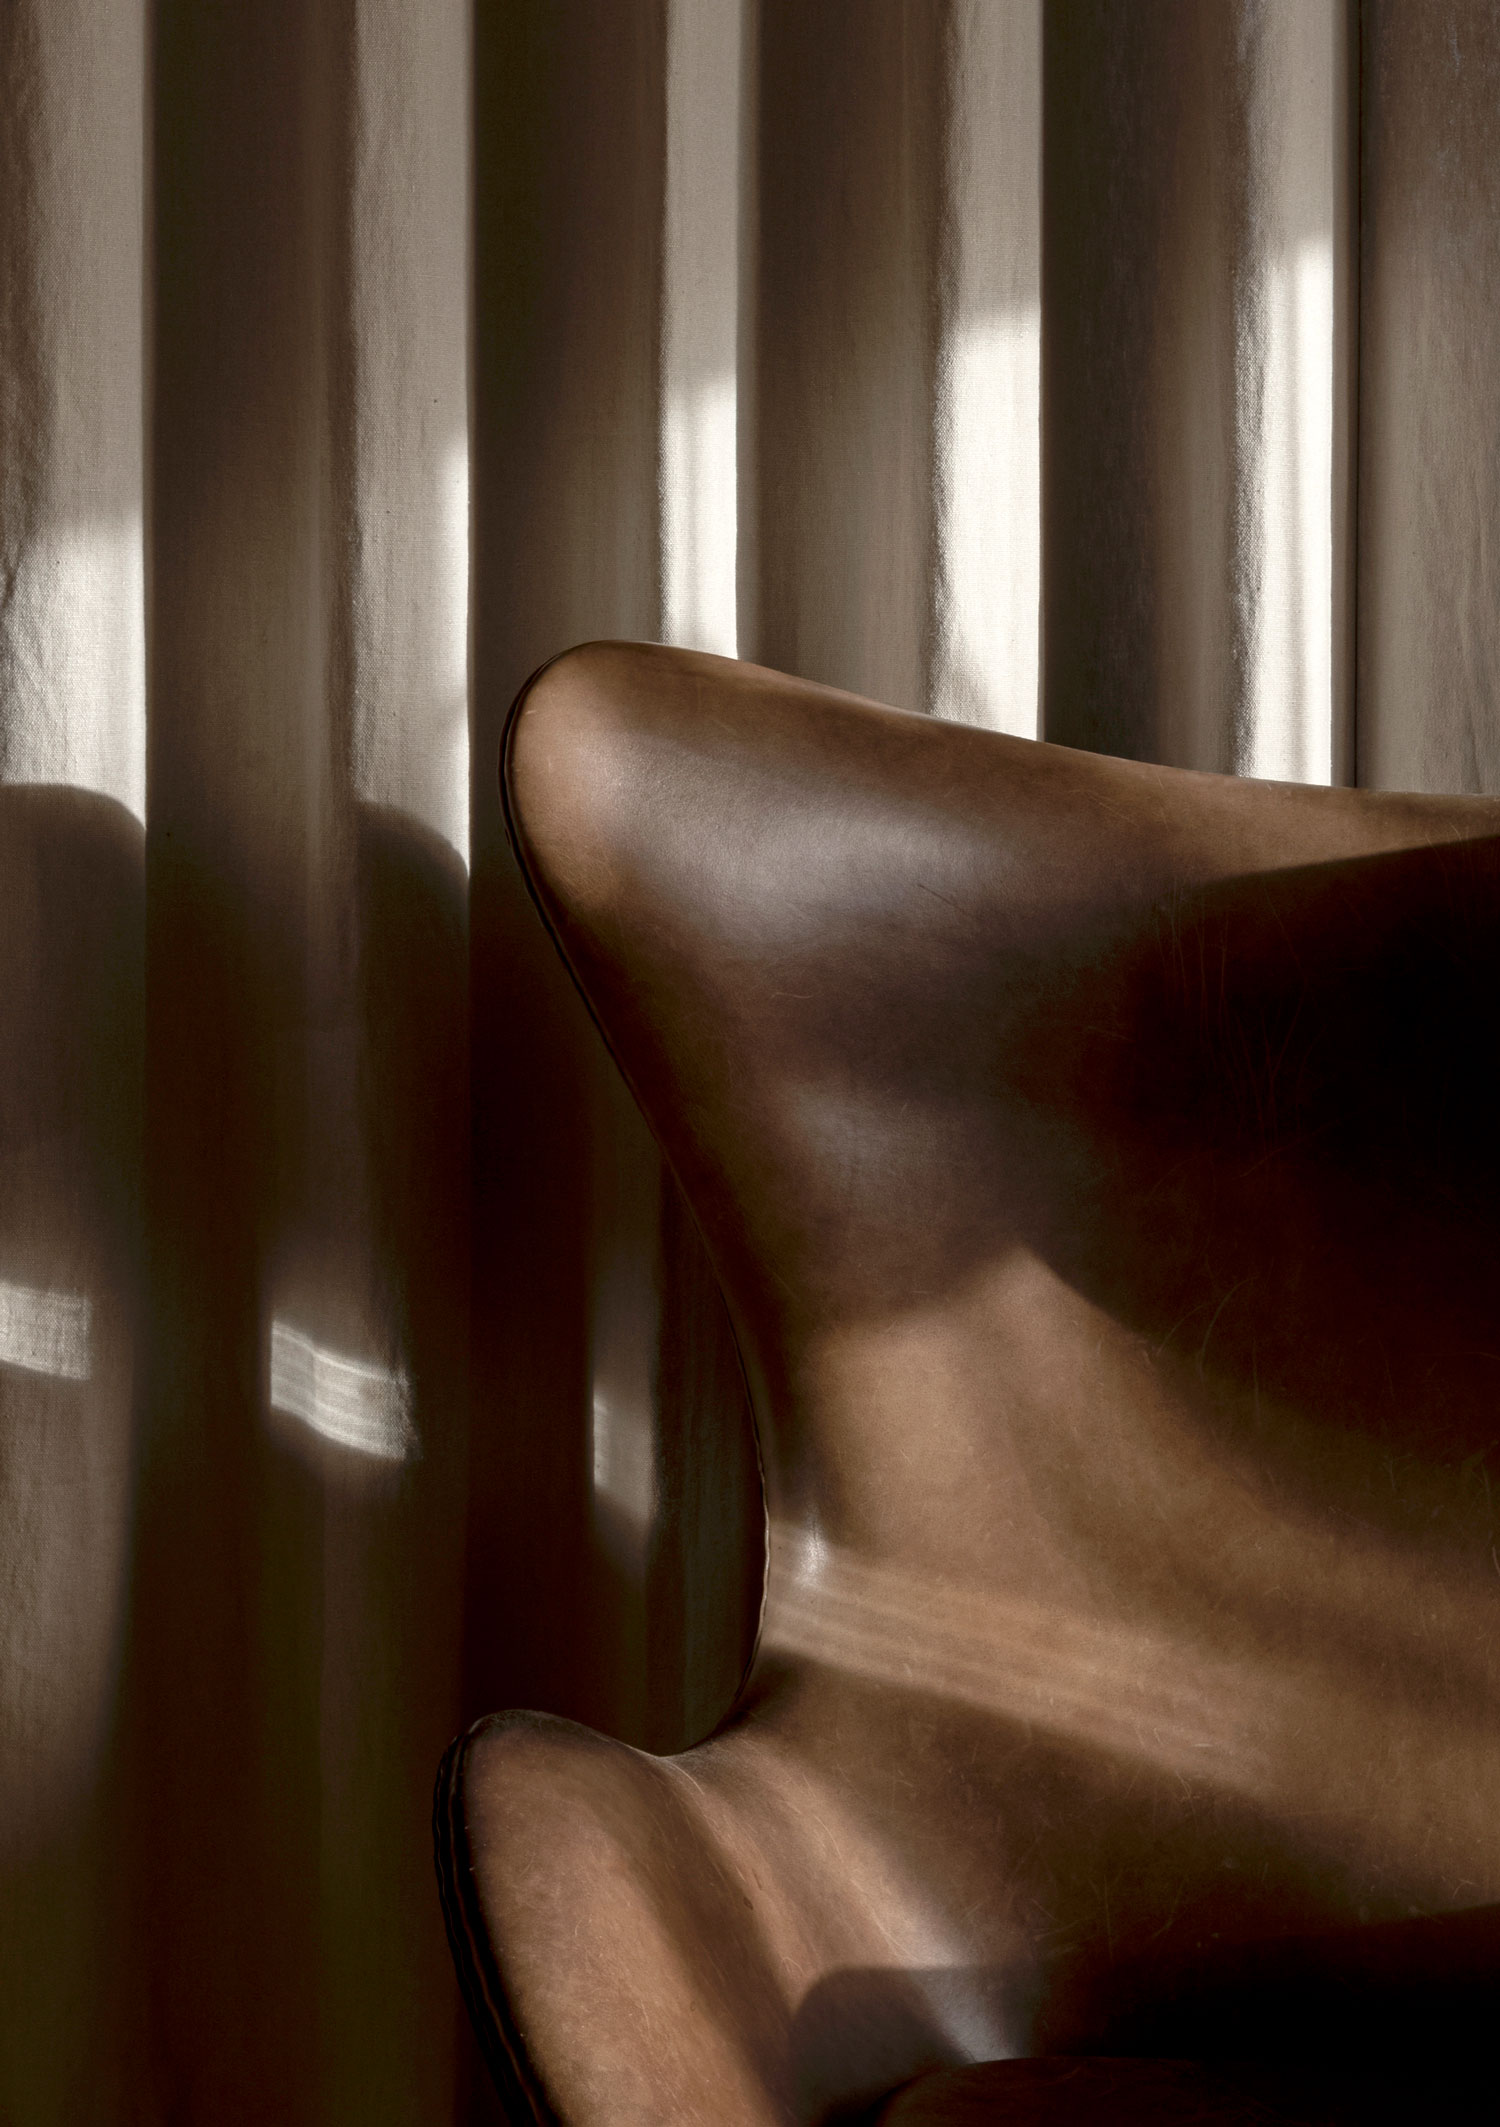 The world-famous Egg™ chair from Fritz Hansen upholstered in ELEGANCE leather on the front.